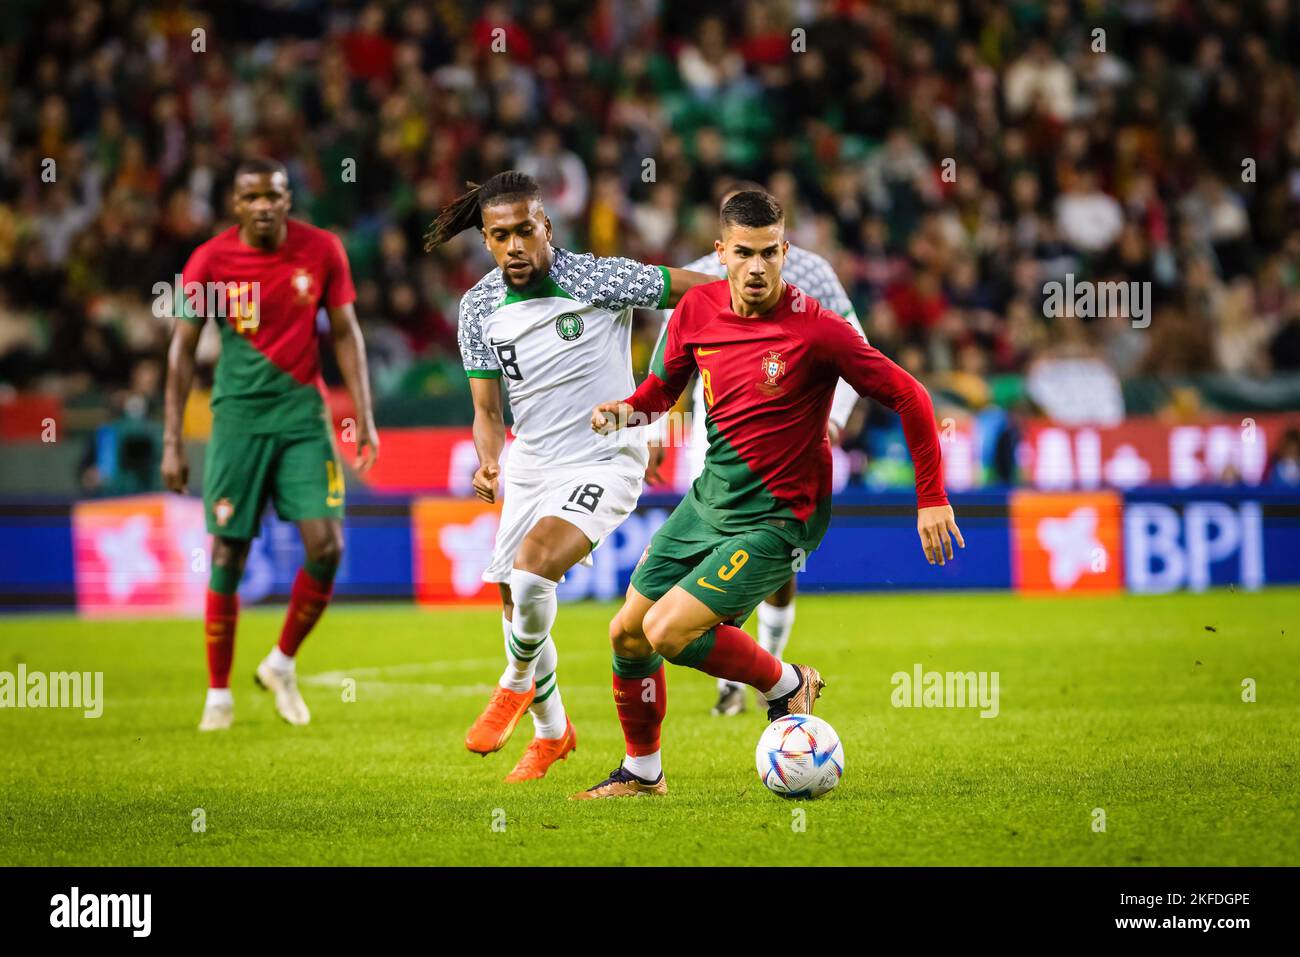 Lisbon, Portugal. 17th Nov, 2022. Andre Silva of Portugal (R) and Alex Iwobi of Nigeria (L) seen in action during the friendly football match between Portugal and Nigeria, at the Jose Alvalade stadium ahead of the Qatar 2022 World Cup. (Final score: Portugal 4 - 0 Nigeria) Credit: SOPA Images Limited/Alamy Live News Stock Photo